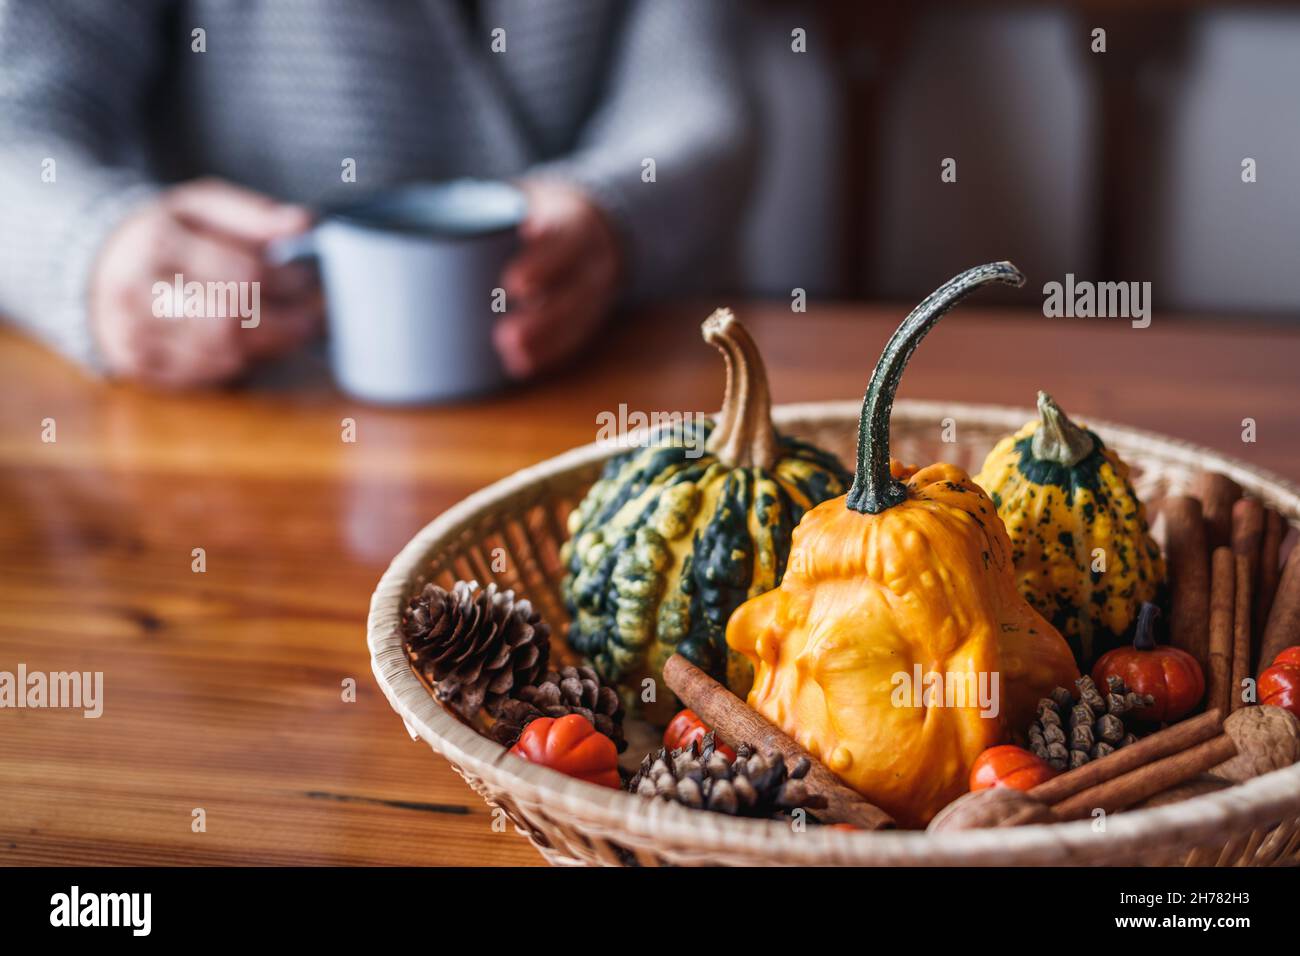 Autumn decoration with pumpkins on wooden table. Defocused woman wearing knitted sweater drinking hot coffee Stock Photo